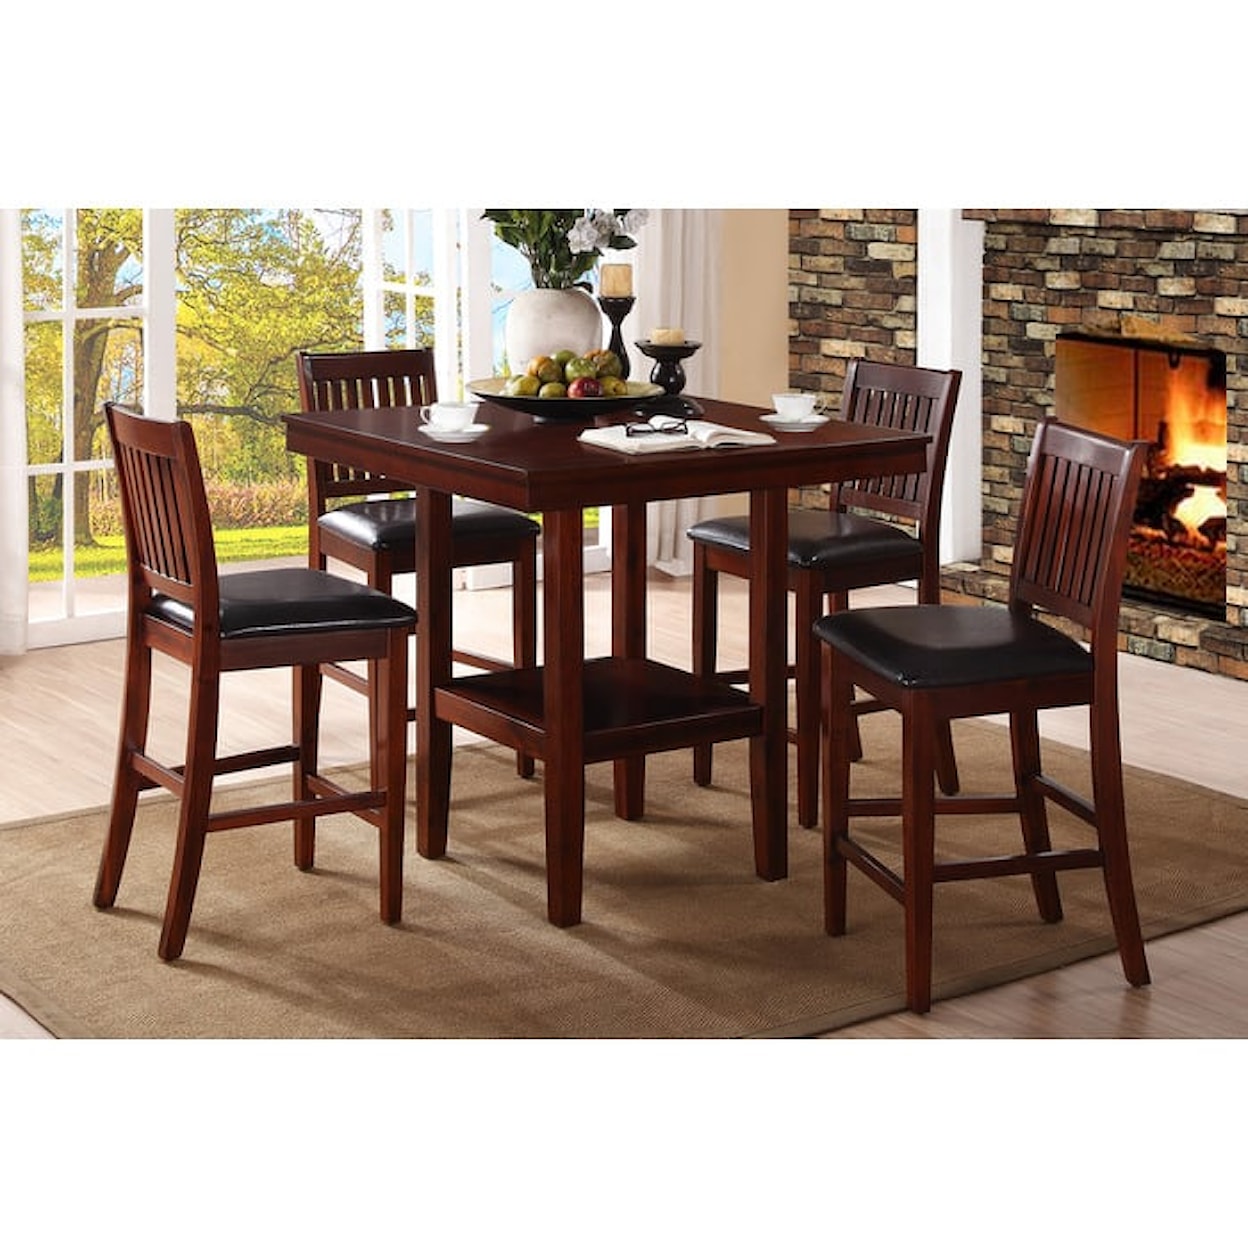 Homelegance Furniture Galena 5050 5 Piece Counter Height Table & Chair Set